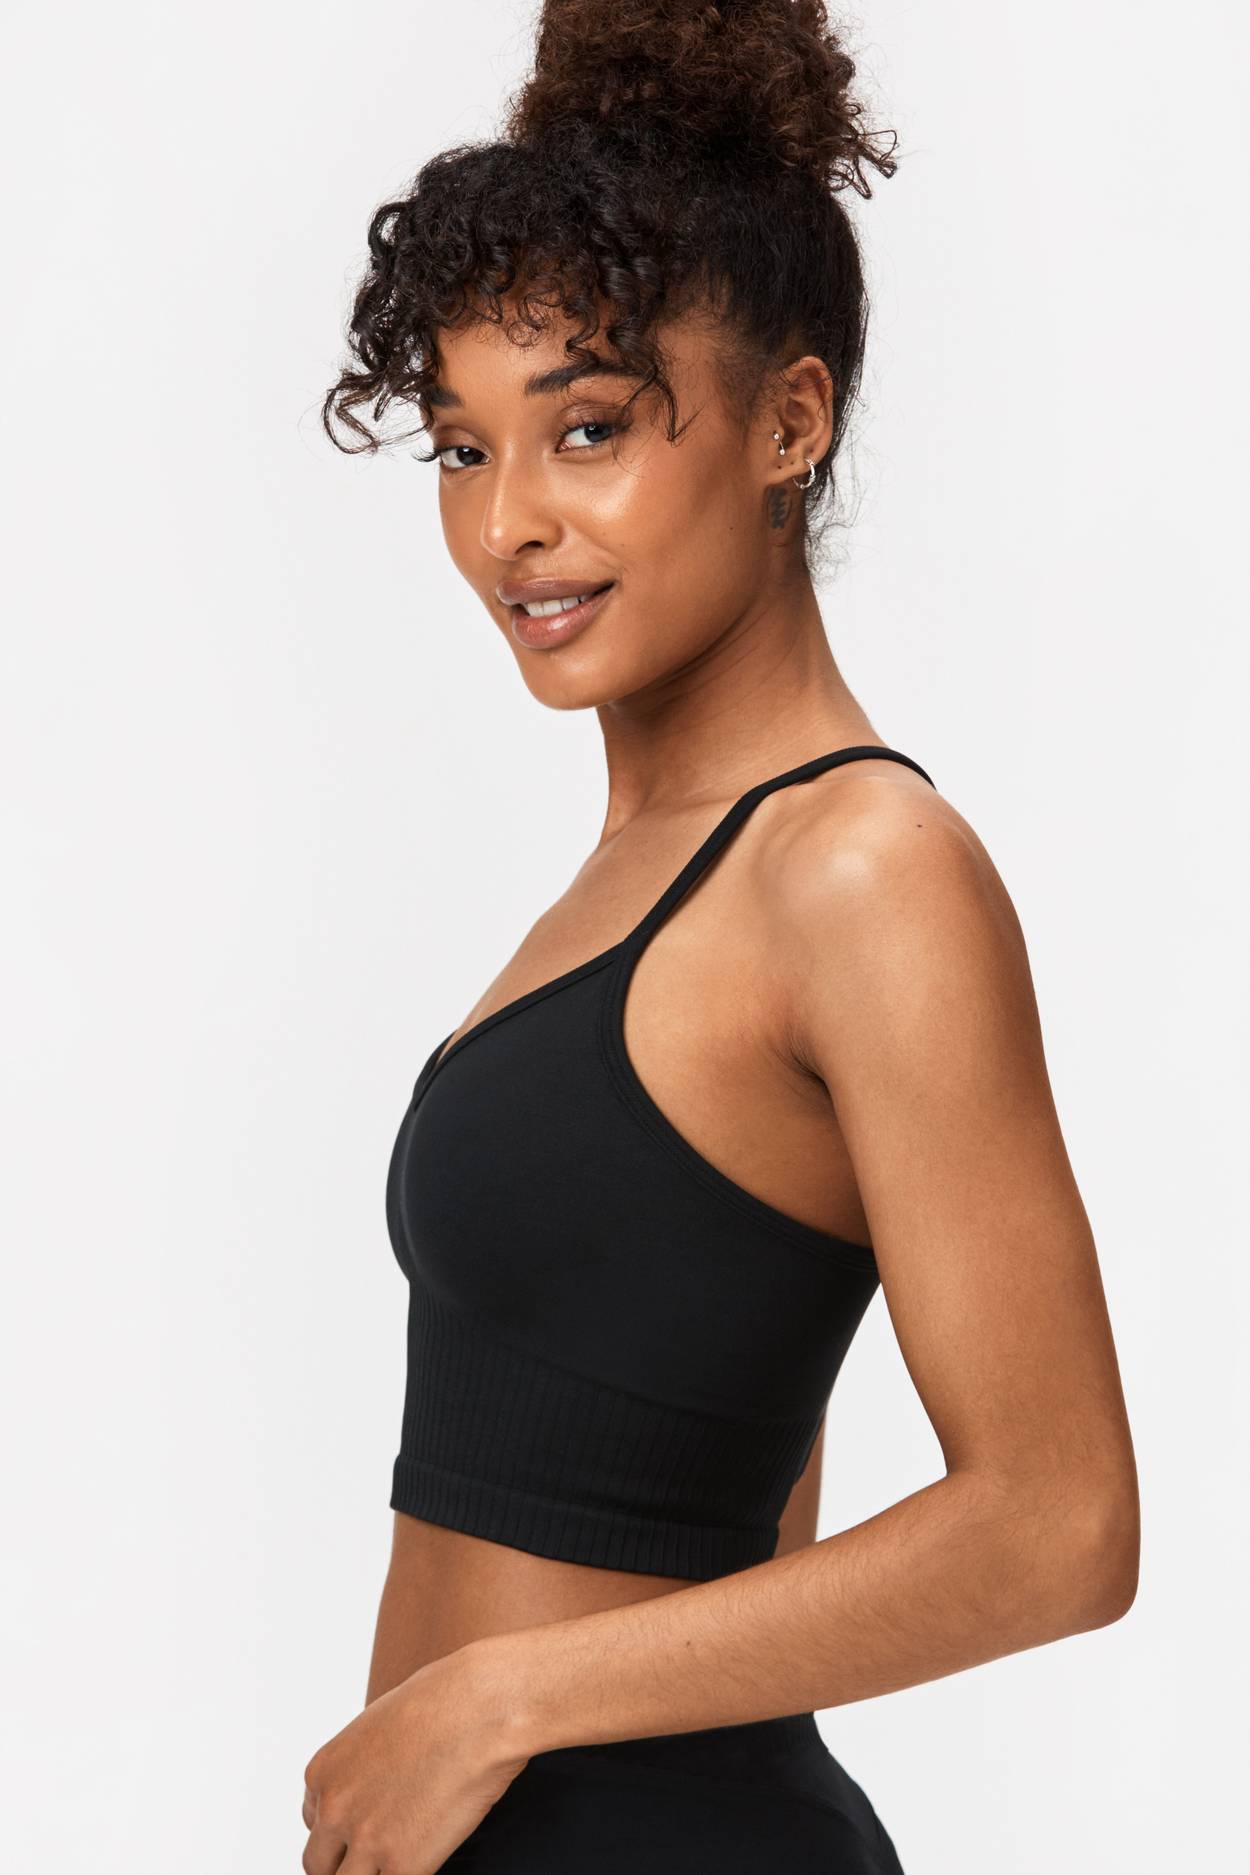 Urban Threads seamless long sleeve sports crop top in charcoal